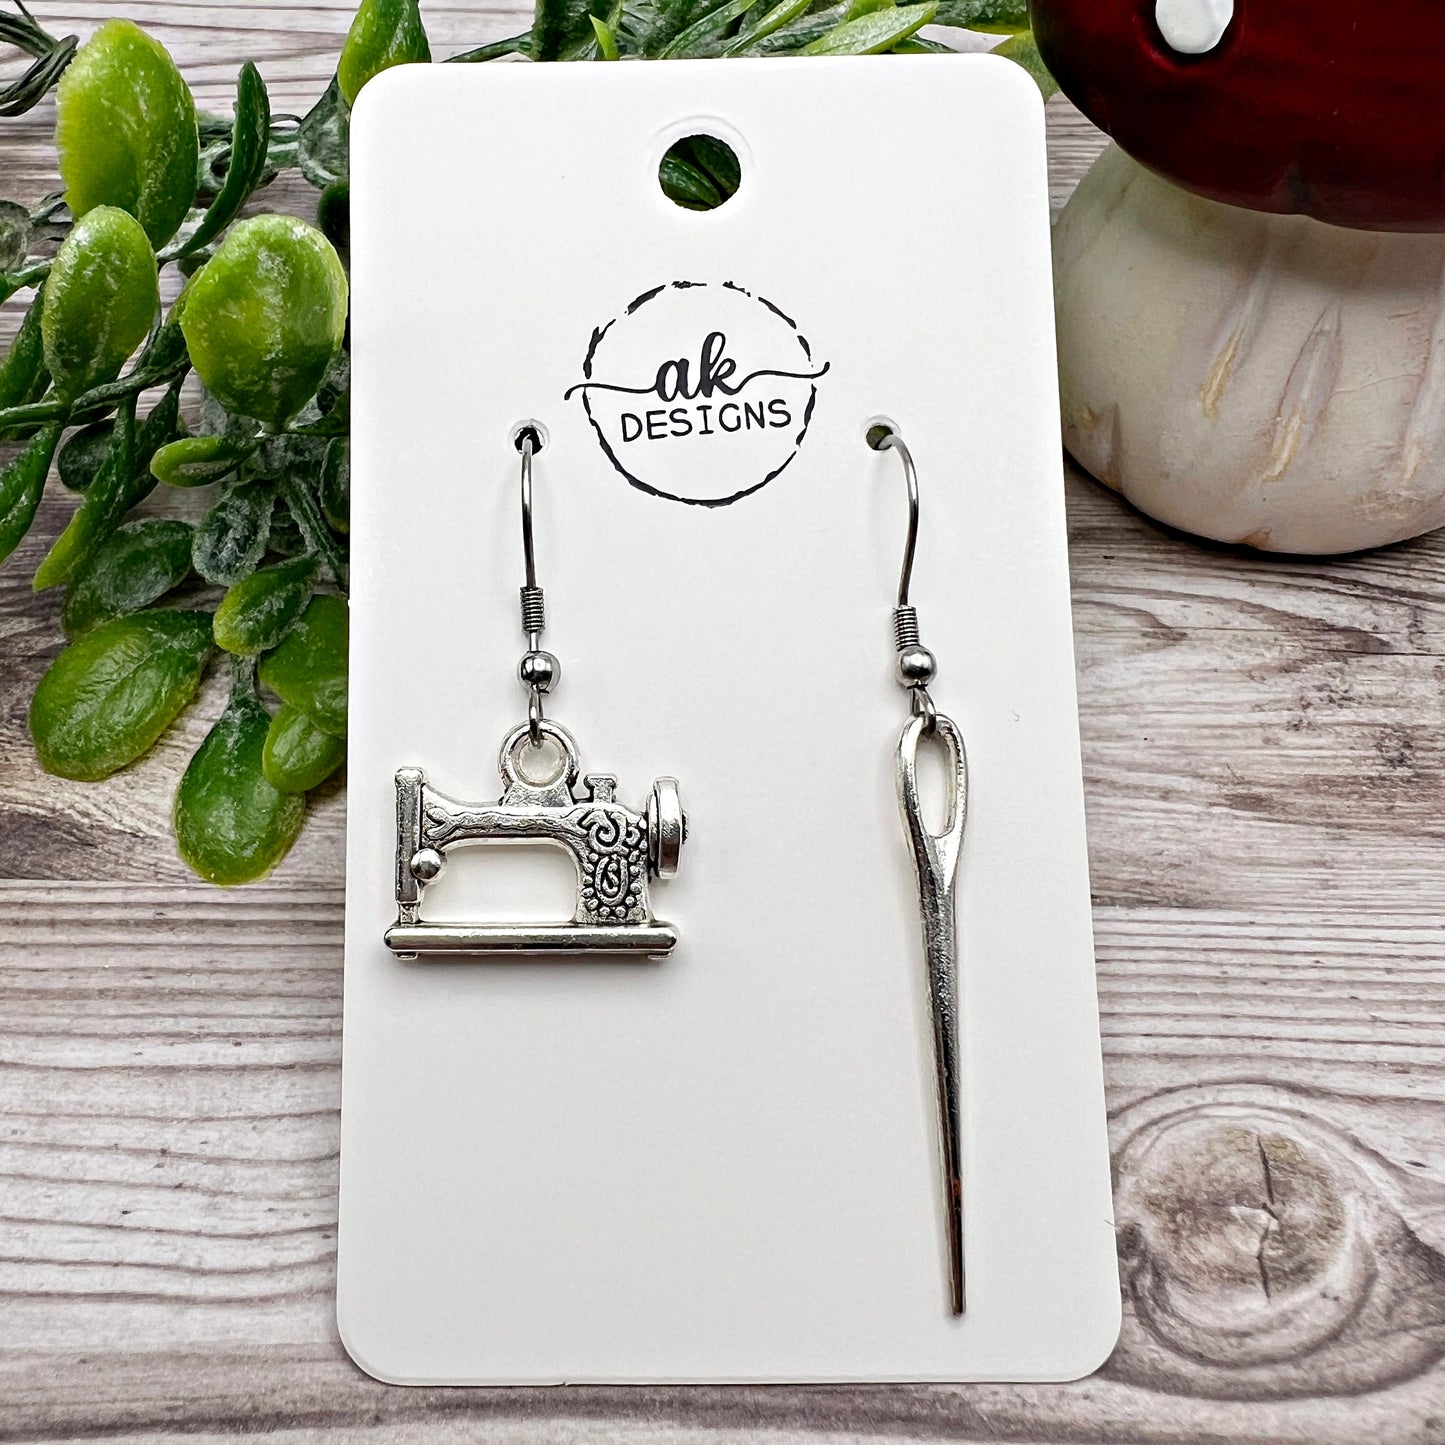 Mismatched Sewing Machine / Needle, Stainless Steel  Earrings, Hypoallergenic Gift